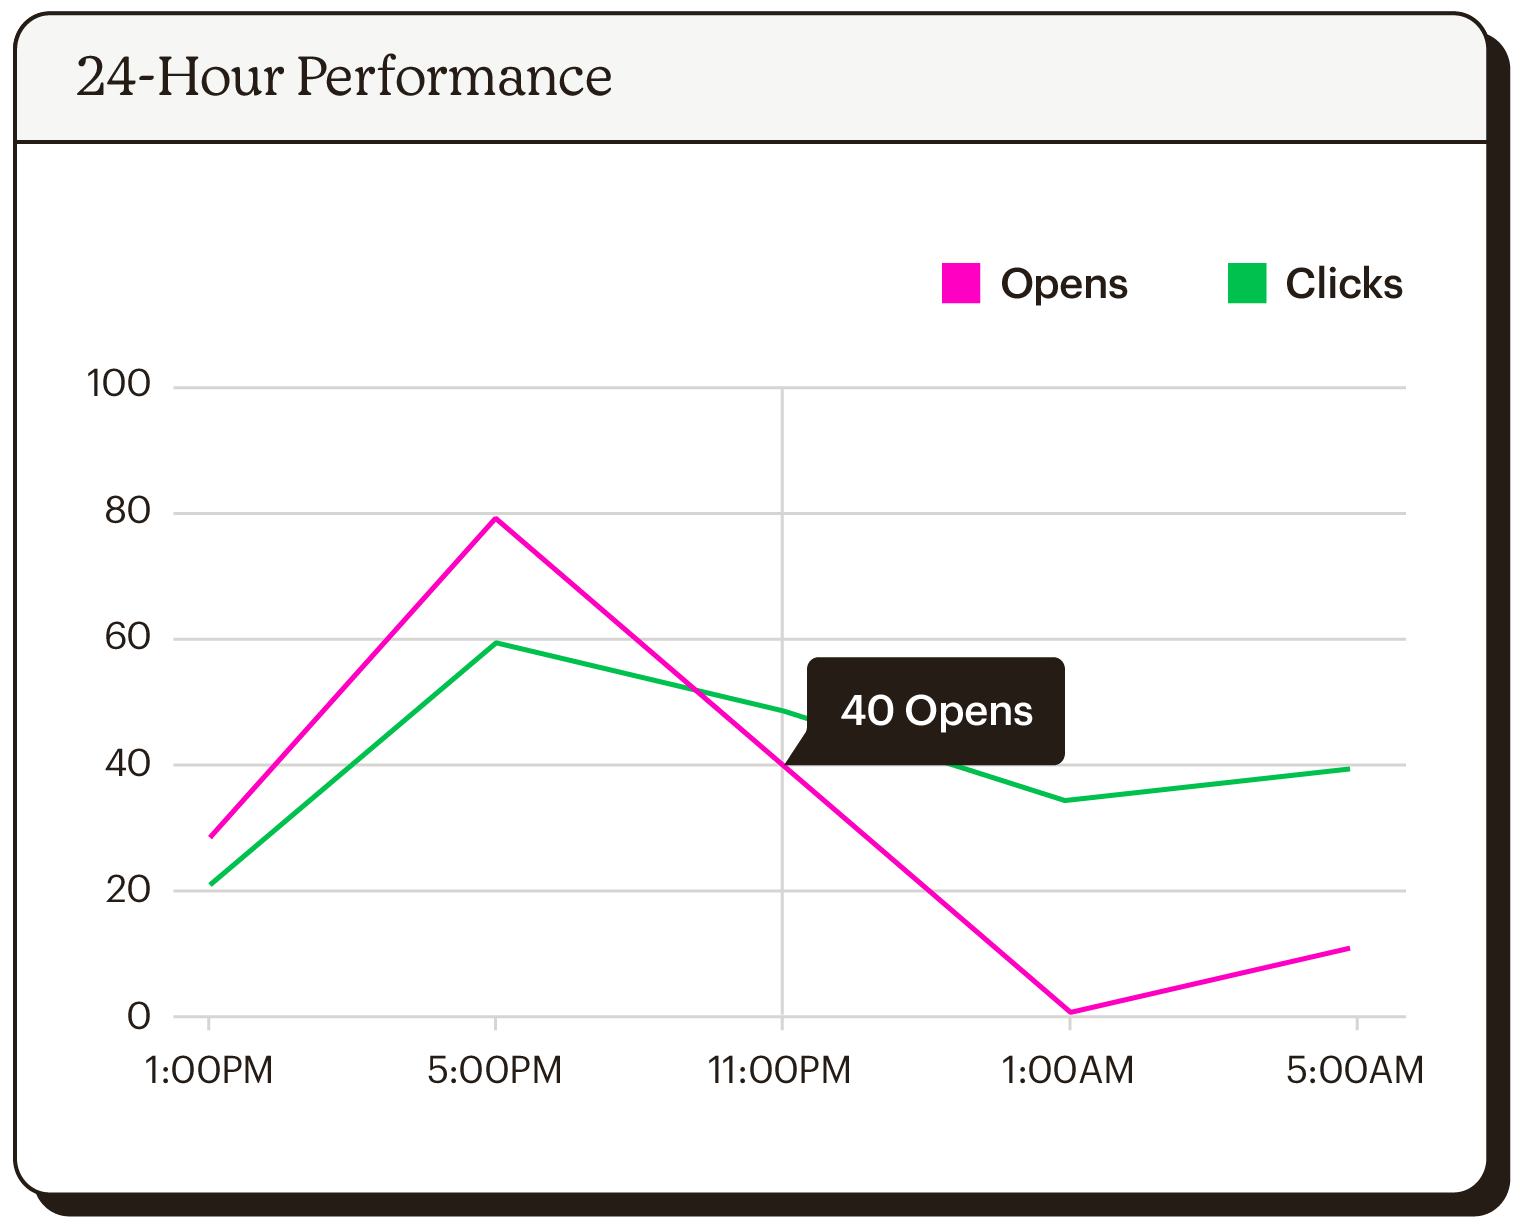 Line graph showing open and click analytics over a 24-hour period.